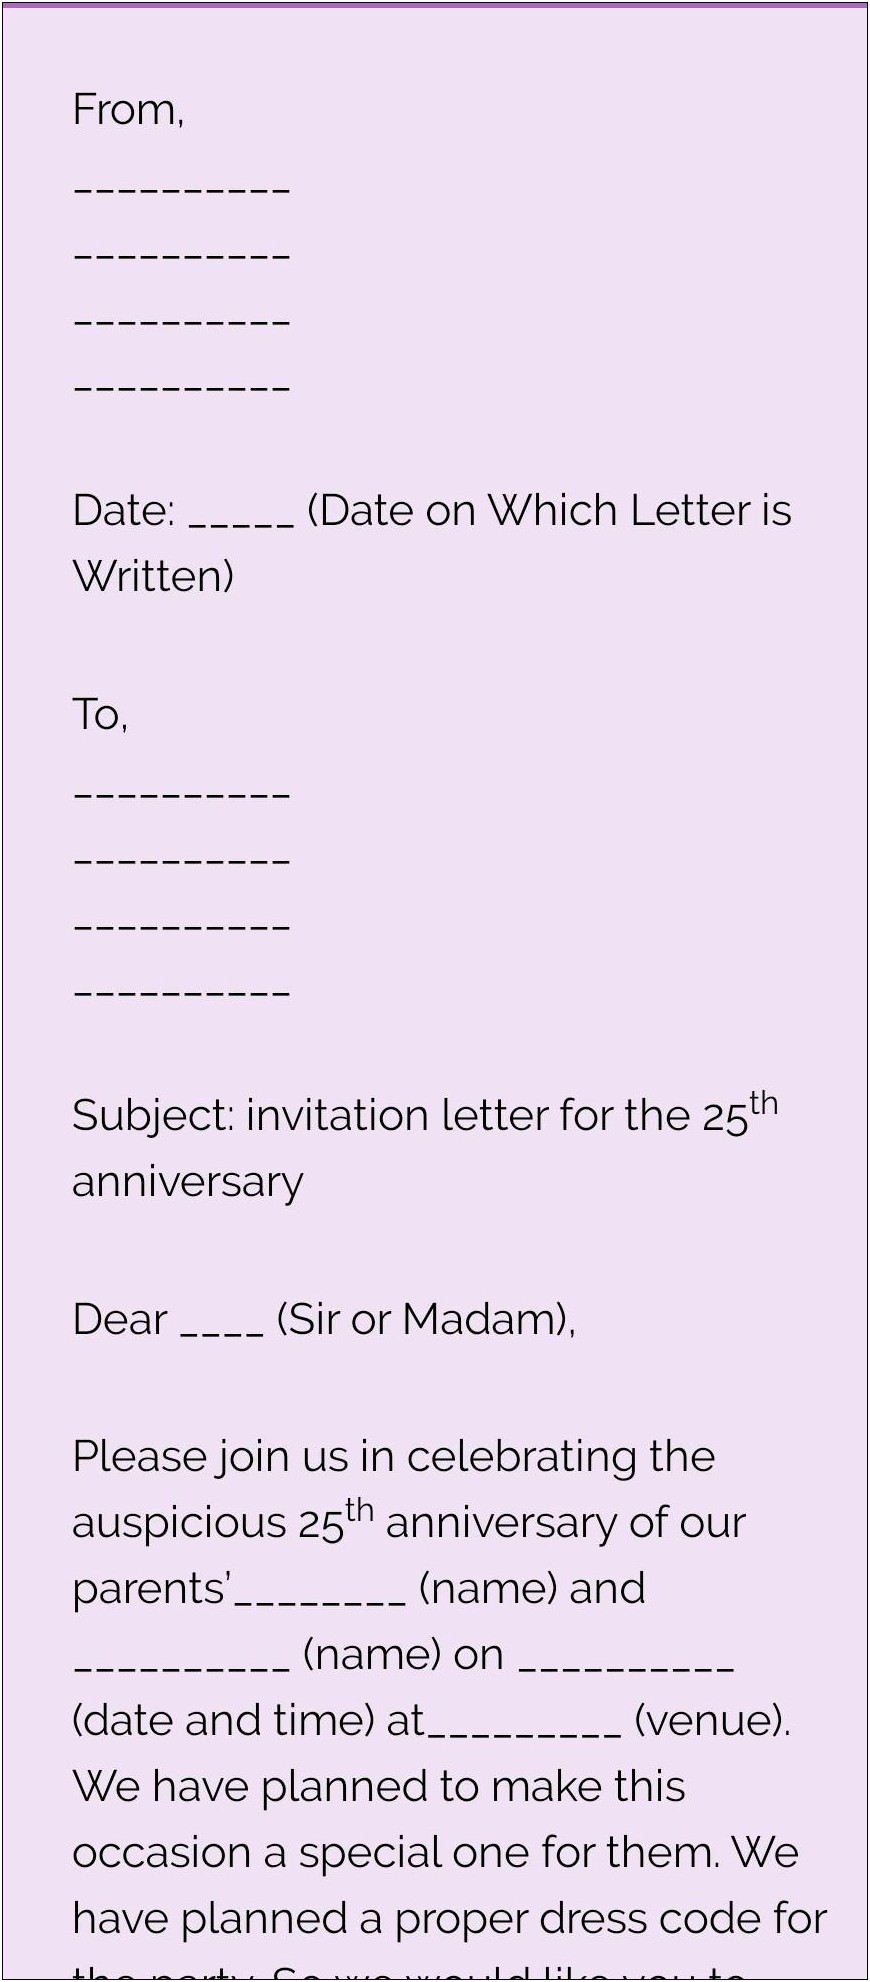 Invitation Letter For Parents Wedding Anniversary